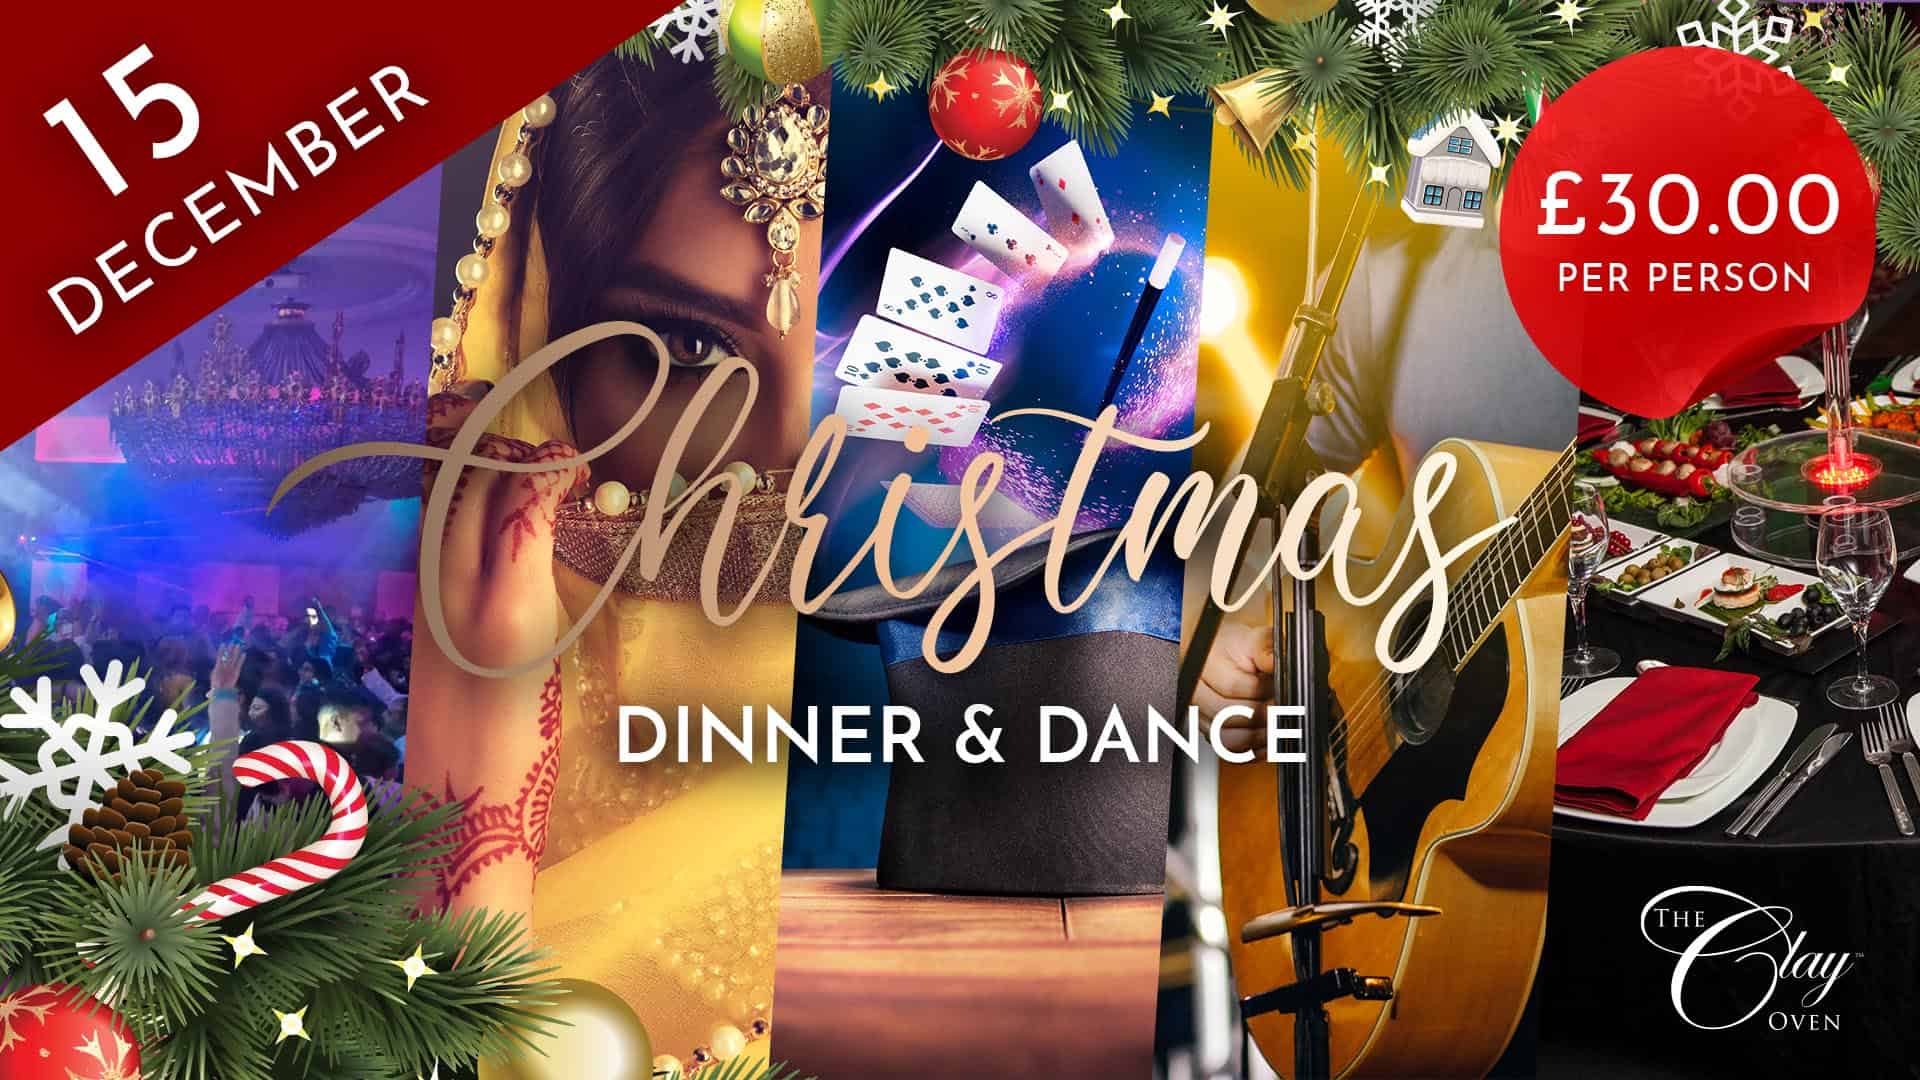 Annual Christmas dinner and dance.